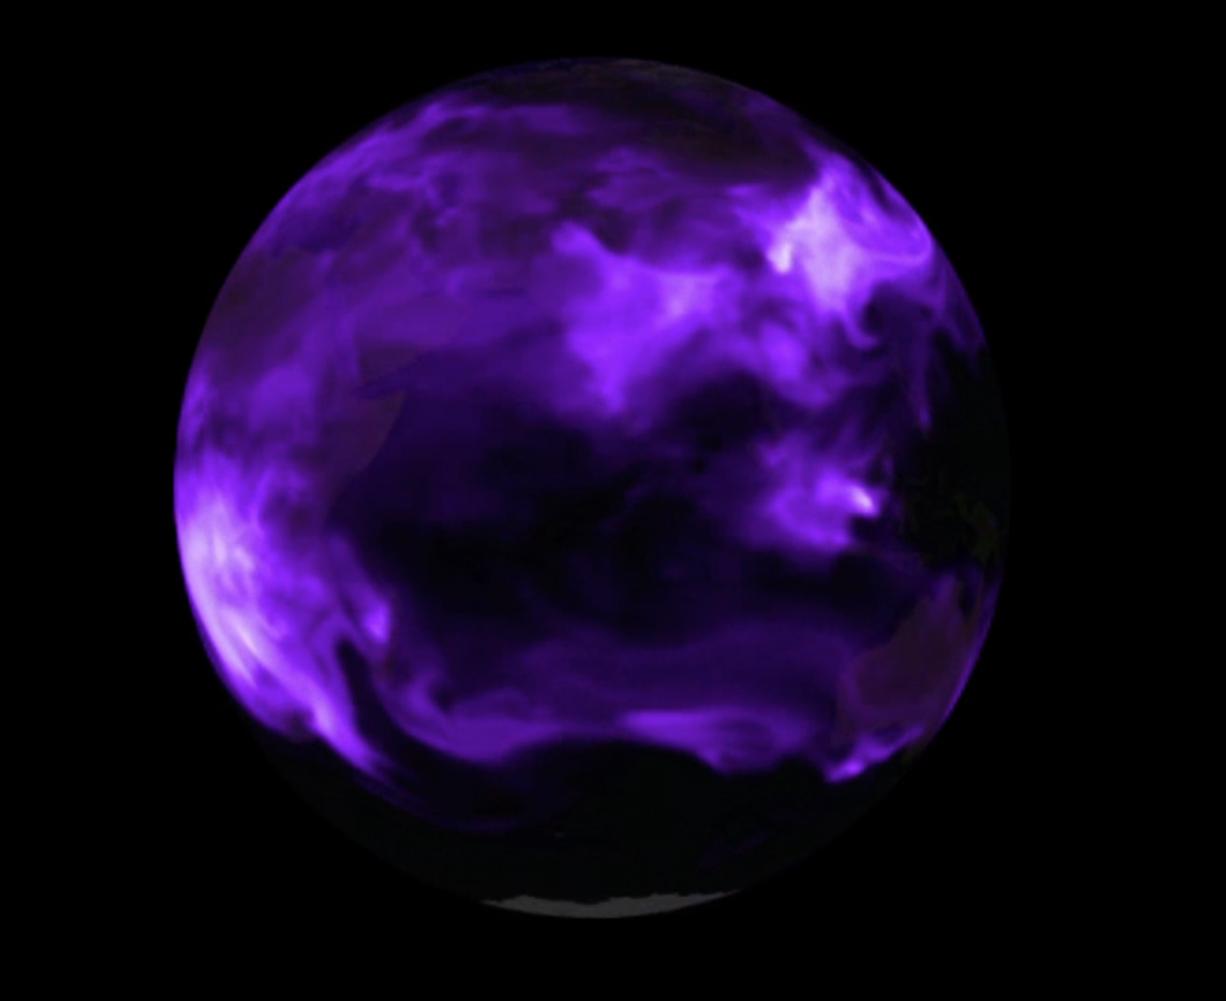 On a black background, a transparent sphere has what appears to be purple gas swirling in it